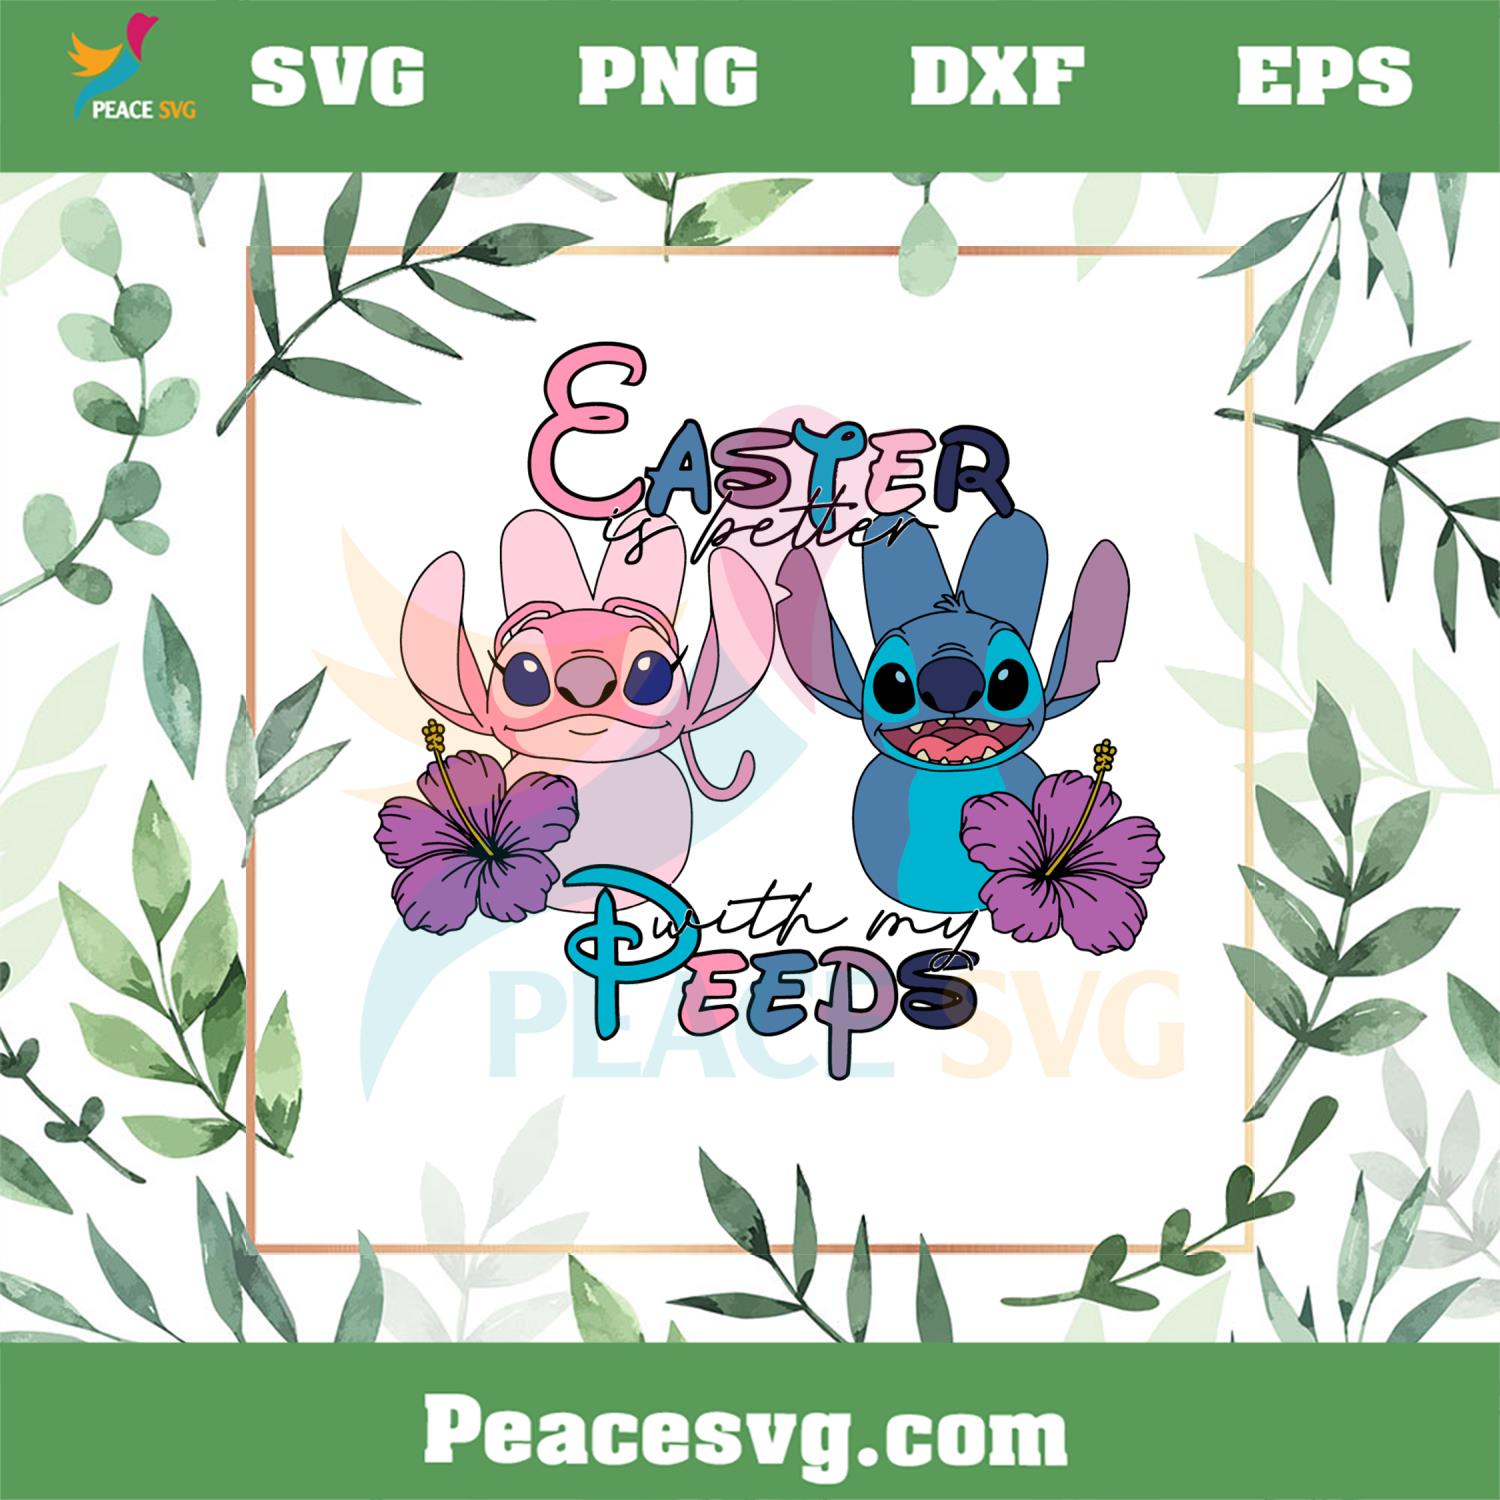 Easter Is Better With My Peeps SVG Cute Stitch And Angel Easter Peeps SVG